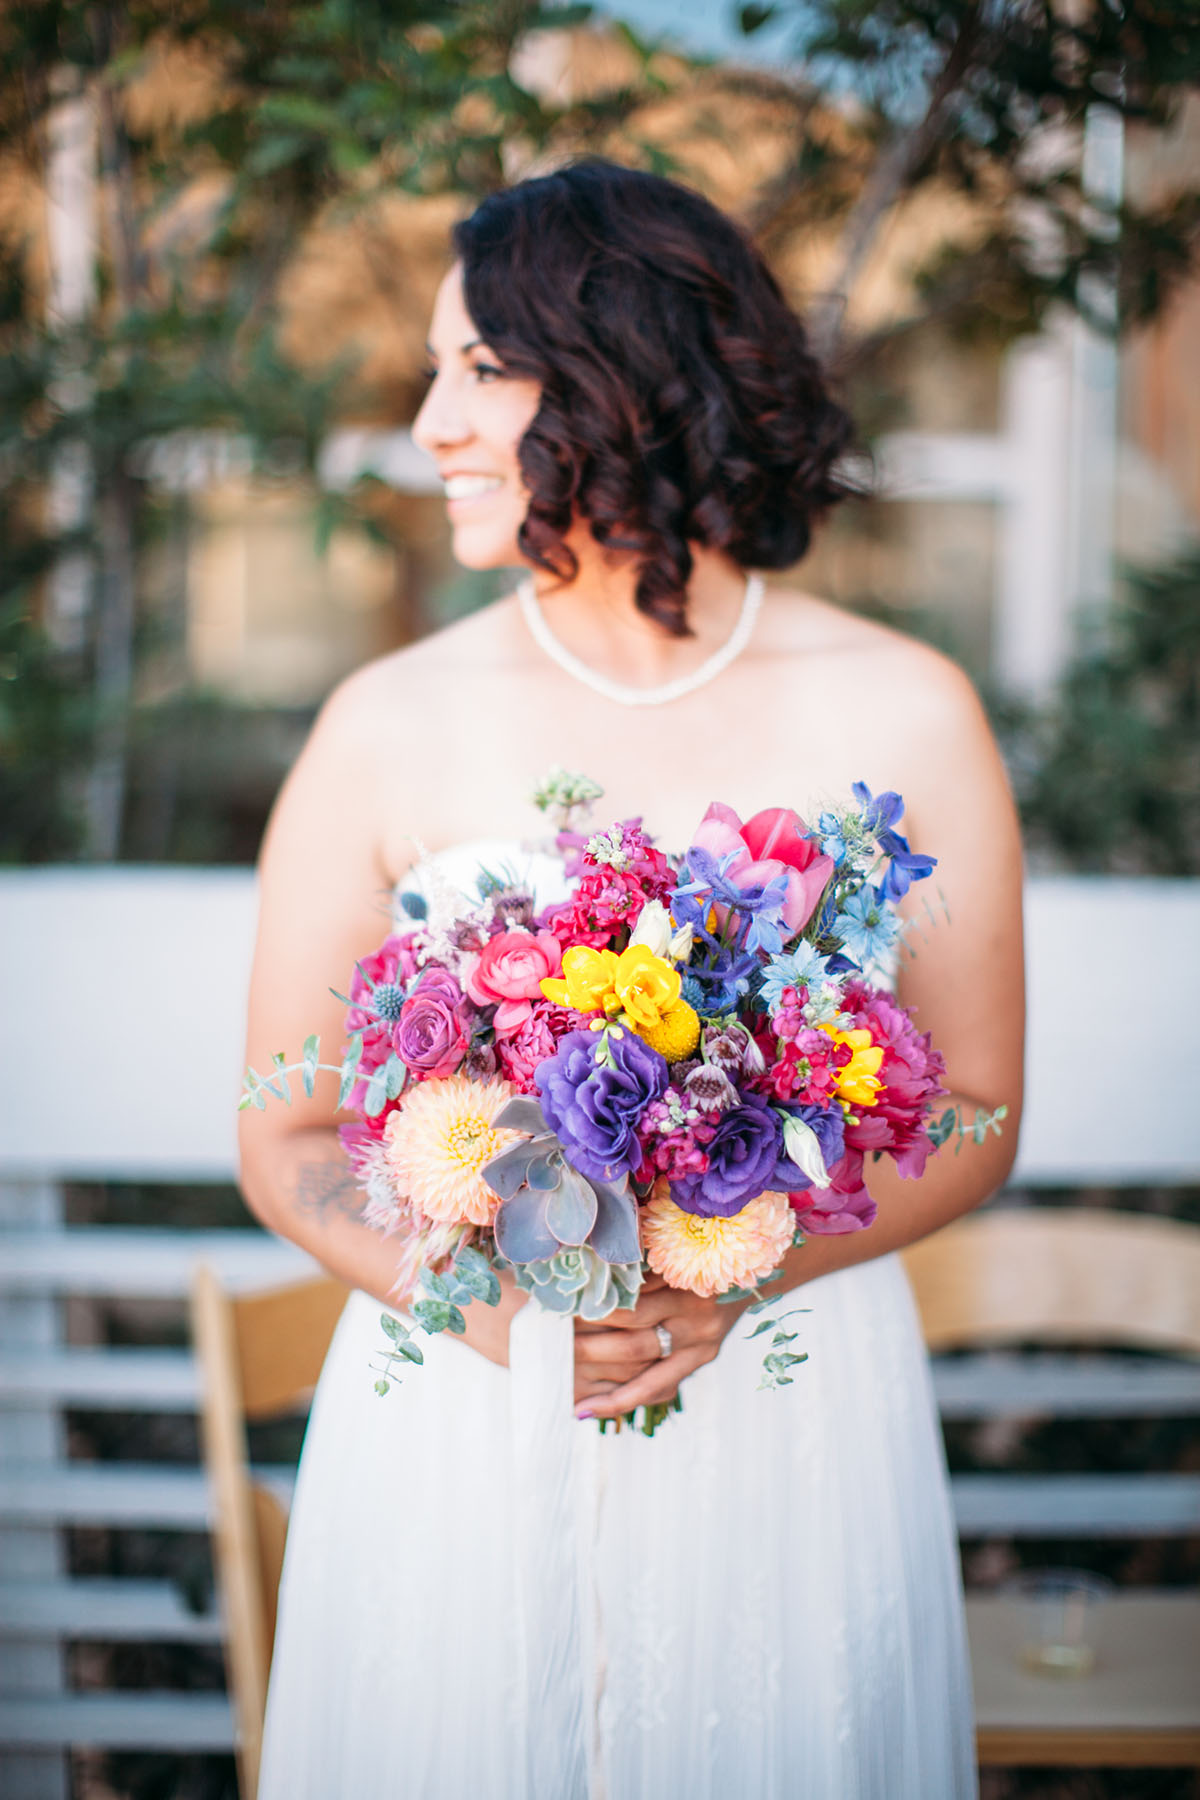 Purple wedding at Mission Trails Regional Park two brides BHLDN David's Bridal white dresses nature outdoors bright colorful bouquet